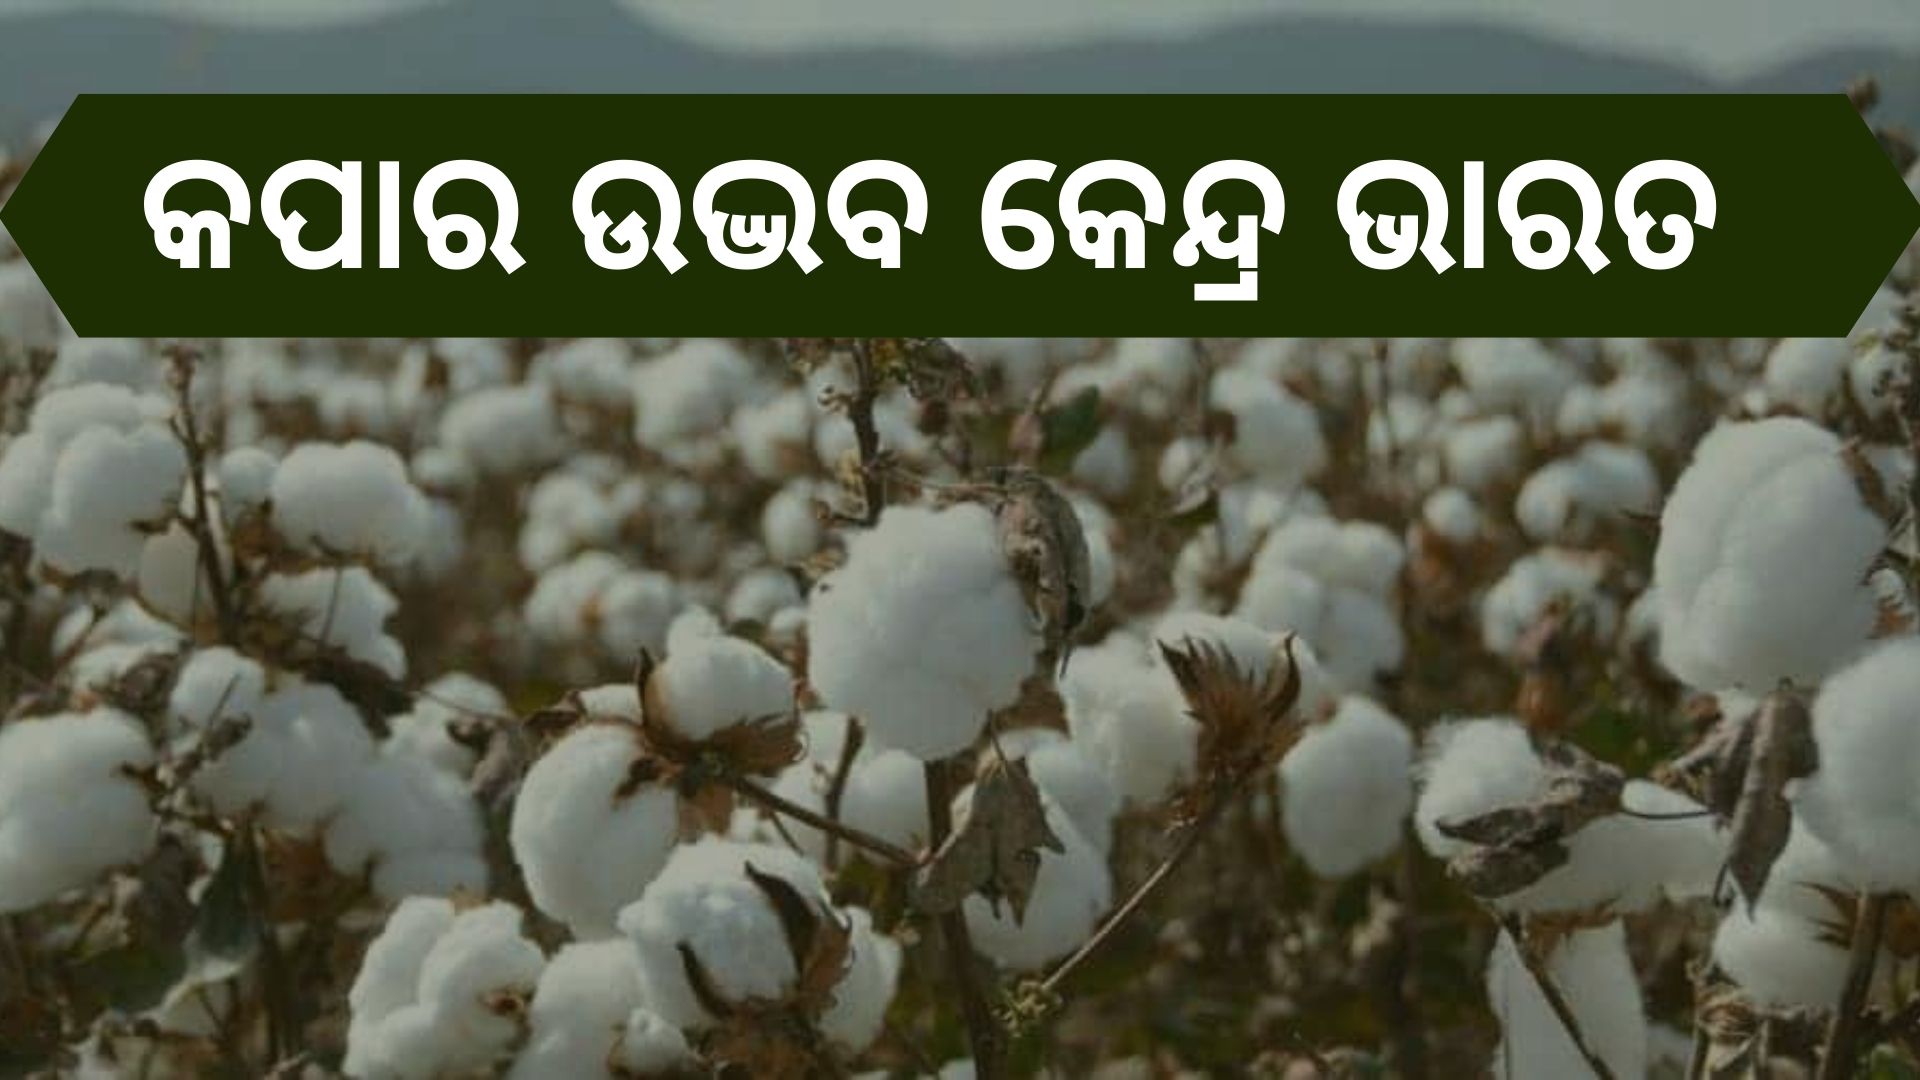 world’s largest cotton producer is India